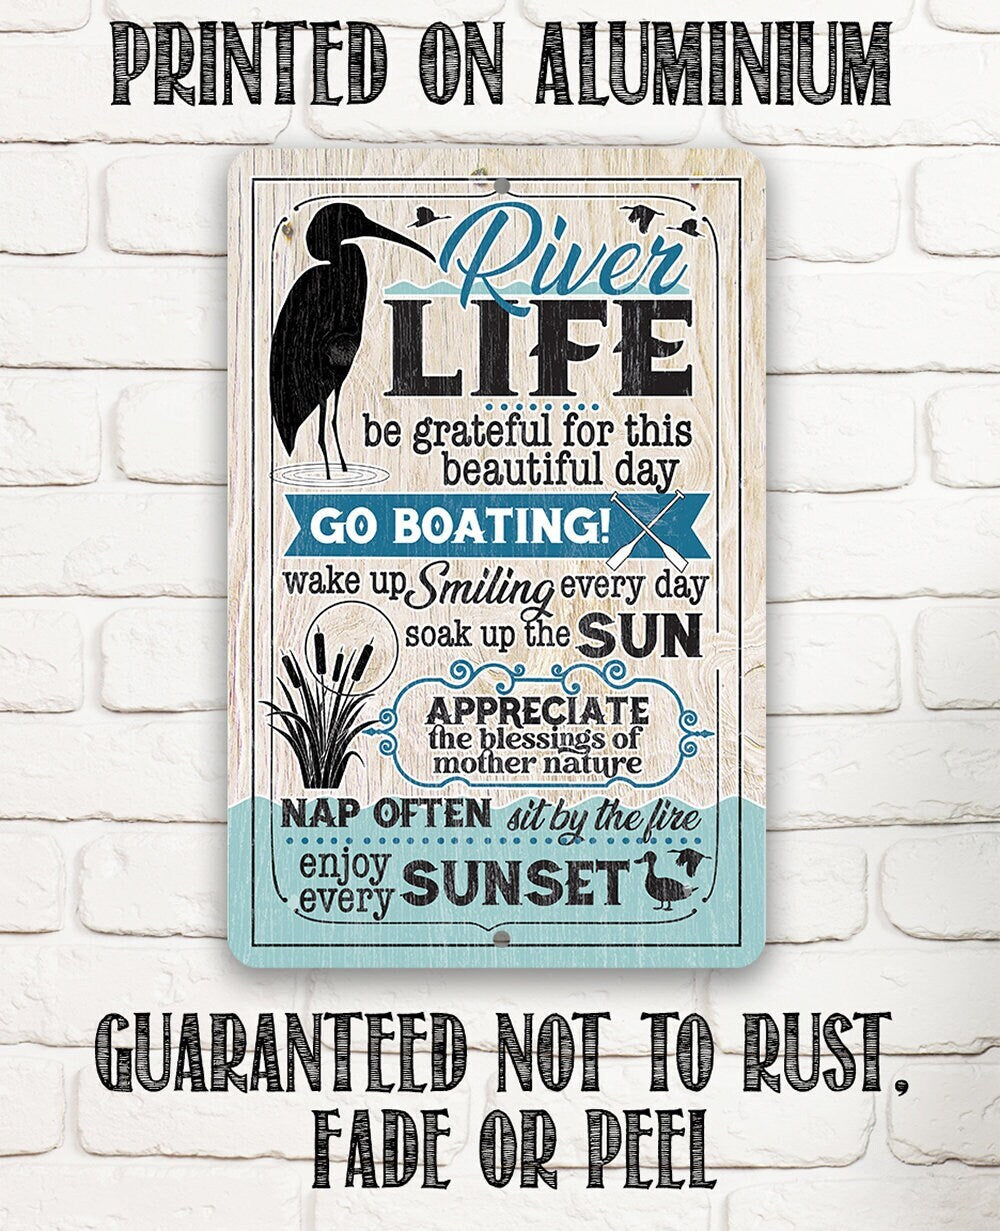 River Life - Inspirational Wall Art Quote Tin Signs, River Outdoor Decoration, 8" x 12" or 12" x 18" Aluminum Tin Awesome Metal Poster